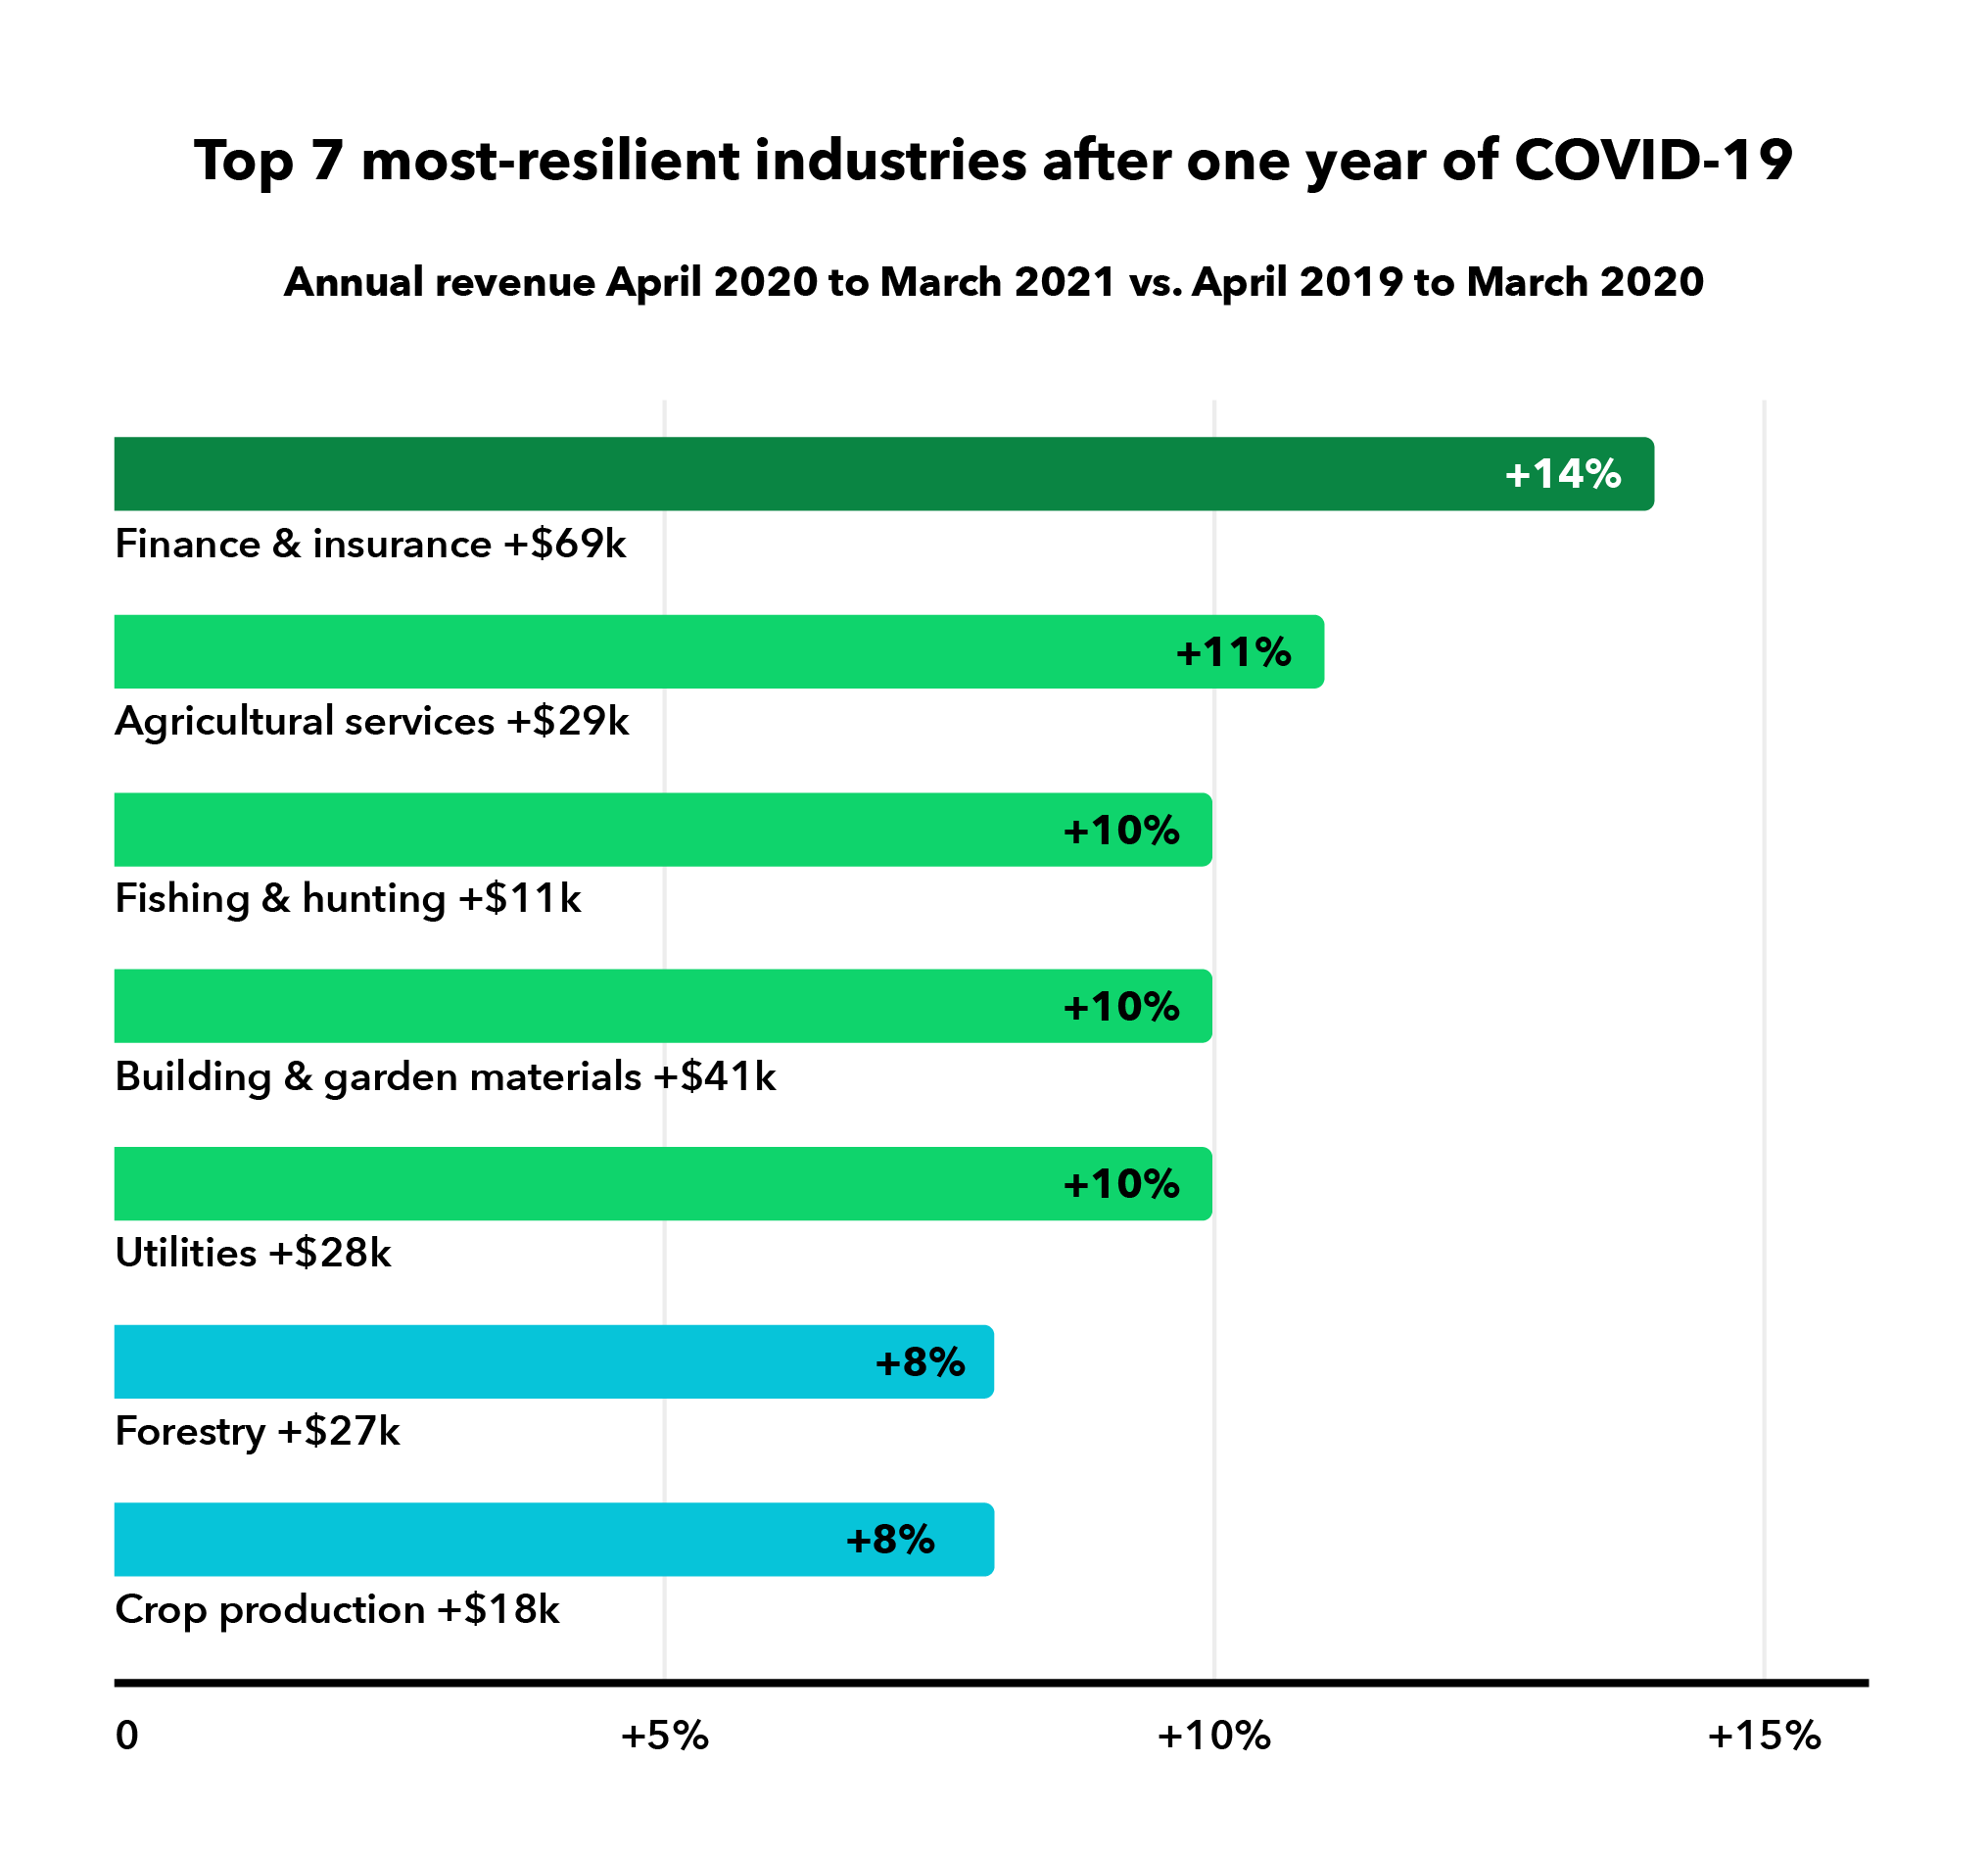 Top 7 most resilient industries after one year of COVID-19